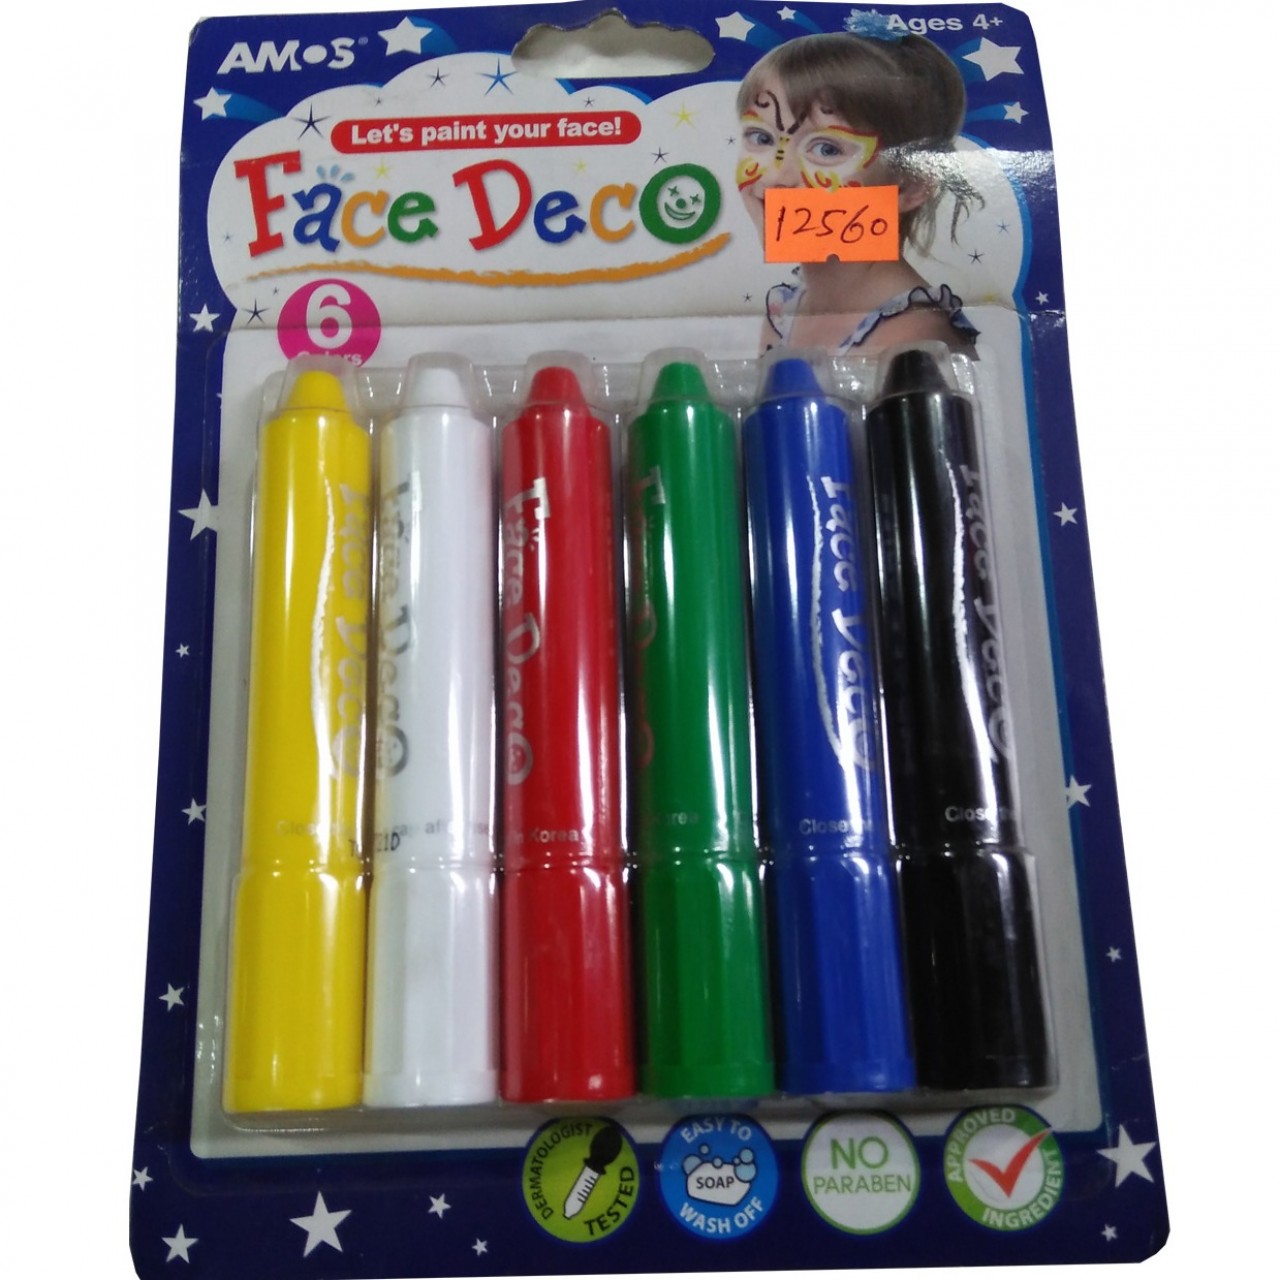 Face Deco For Face Painting - 6 Pieces - For 6+ Ages